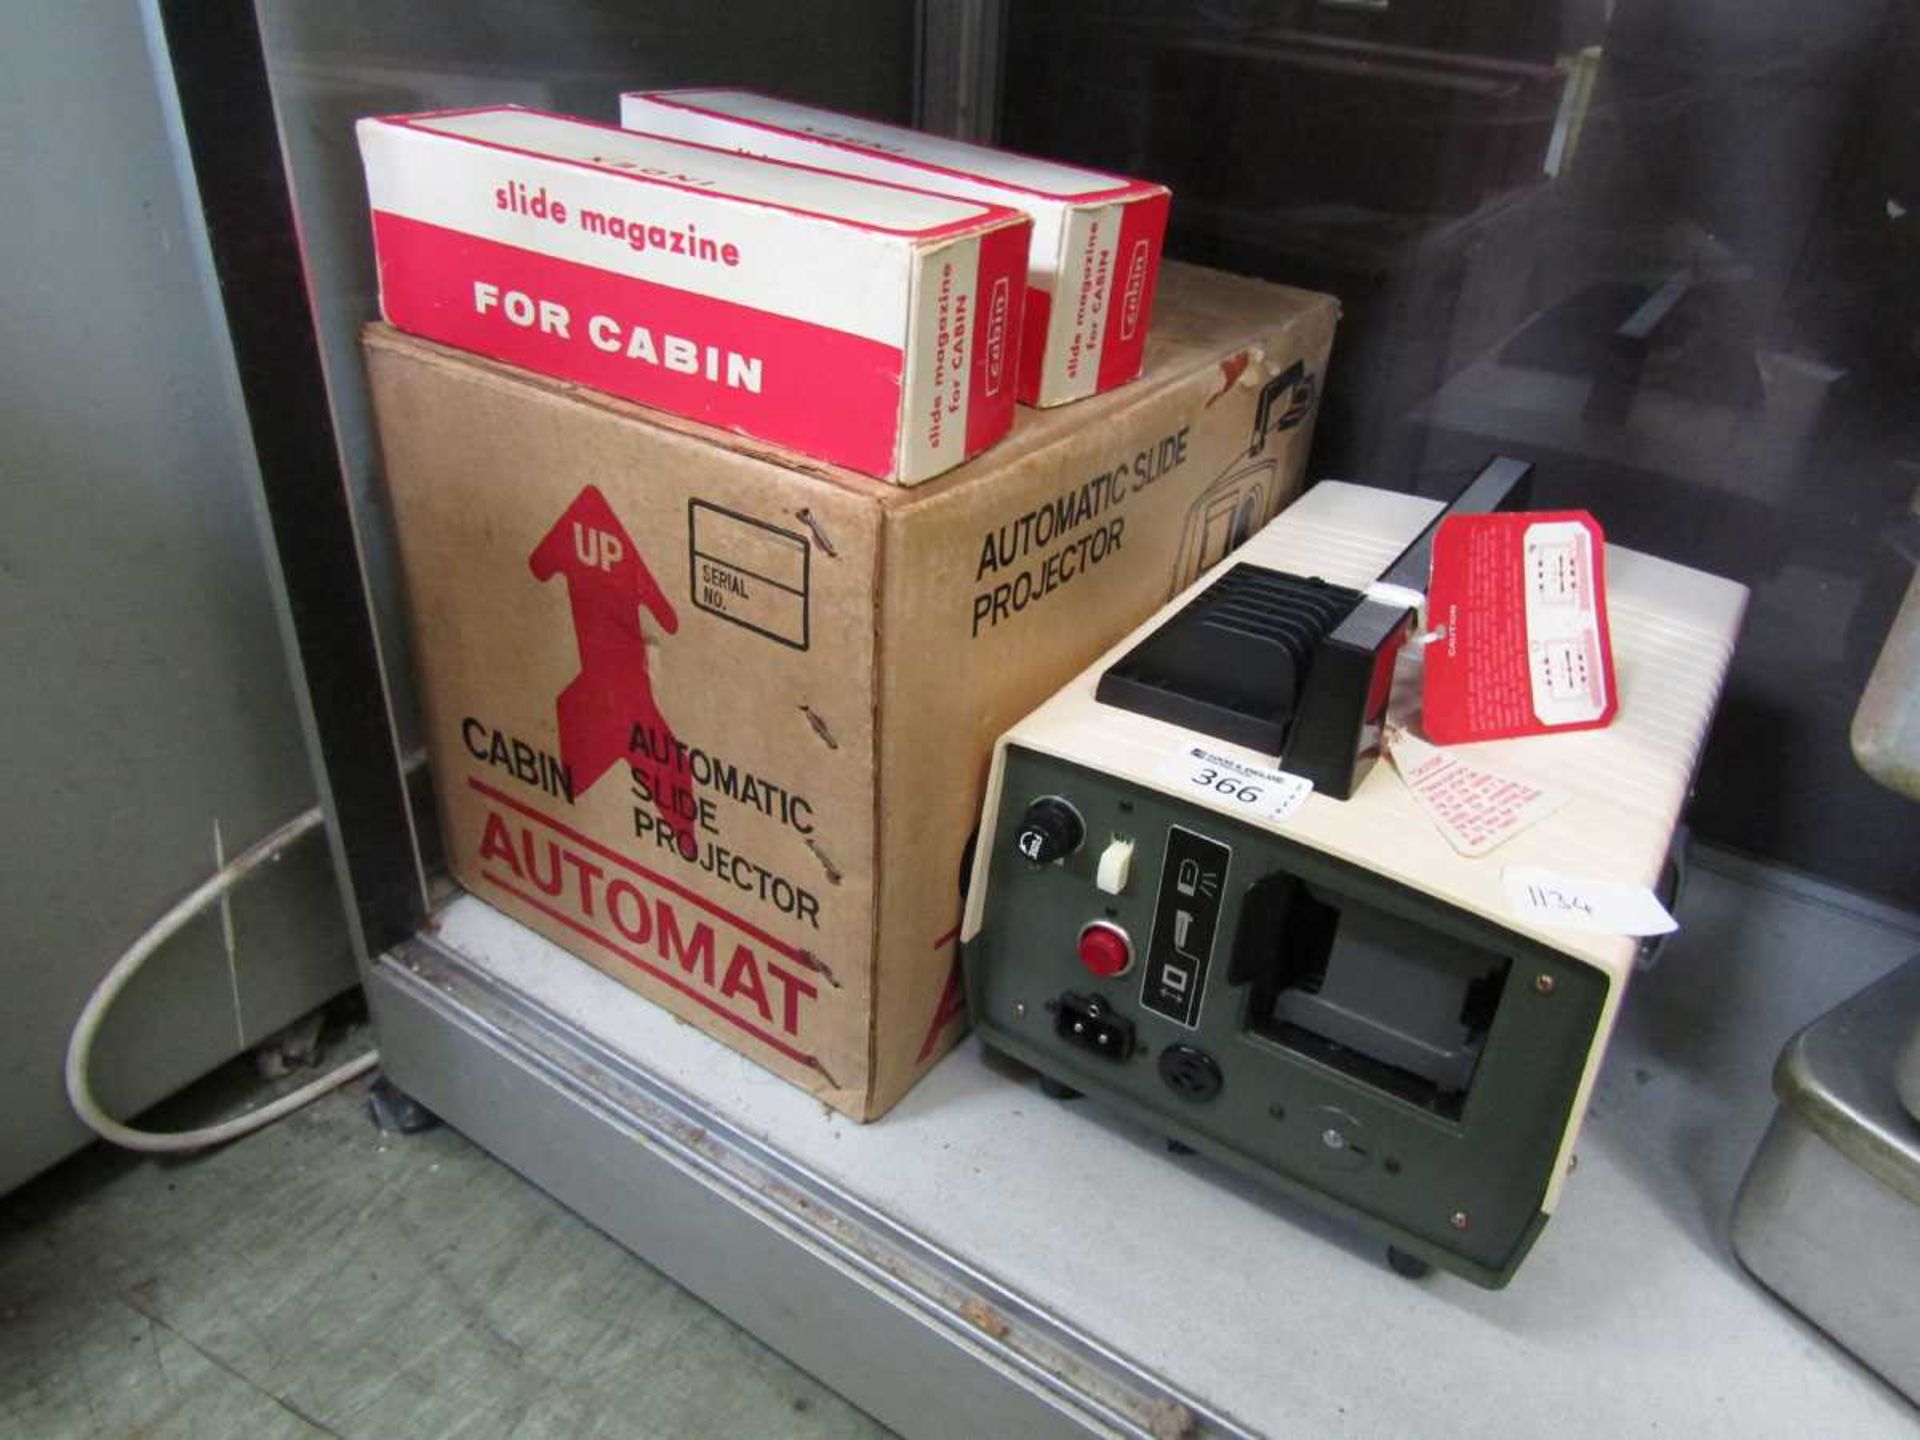 A Cabin Automat slide projector with accessories